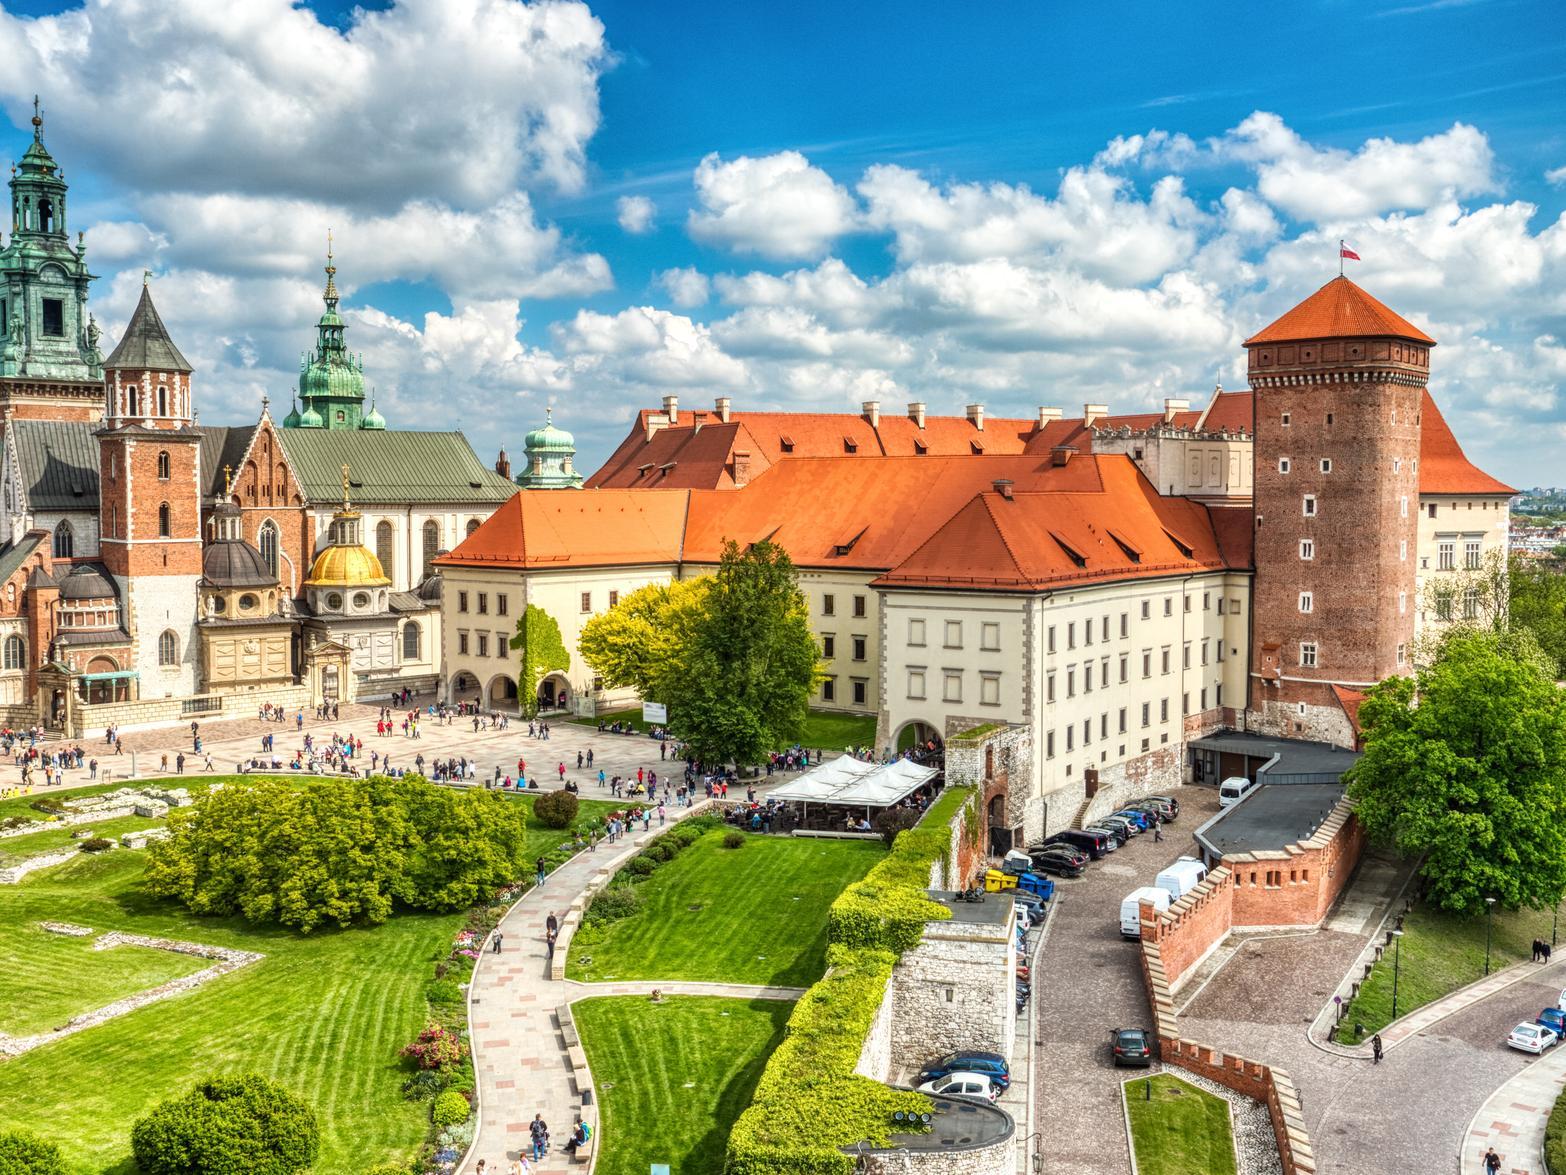 With 14 UNESCO World Heritage Sites, Poland has reasons to keep on visiting time after time.